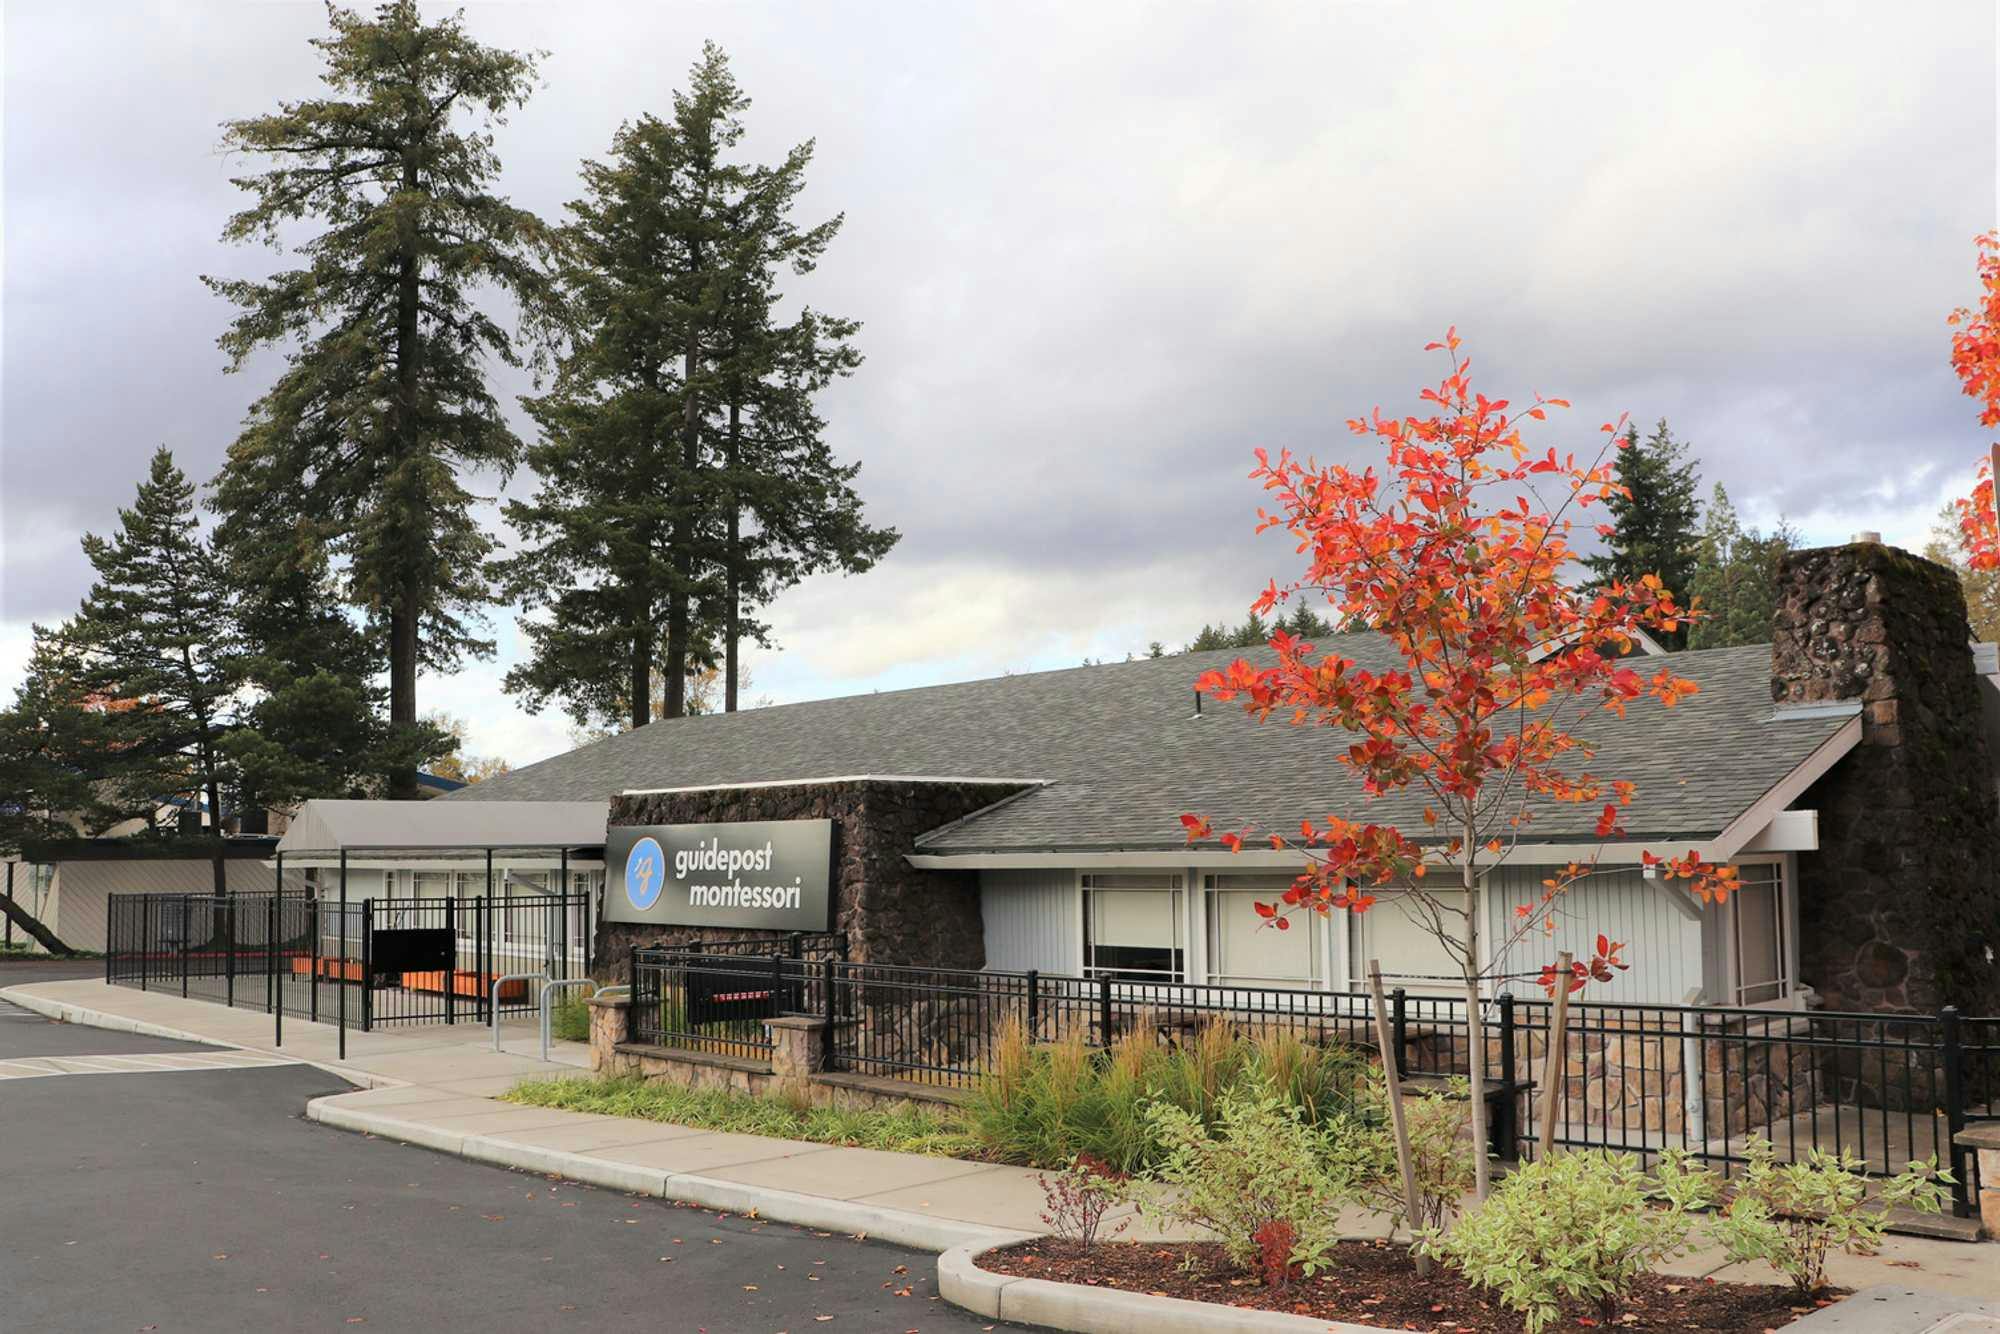 View of Guidepost Montessori at Beaverton from the parking lot showing the fenced in campus with its towering trees in the background, a branded Guidepost Montessori sign, and a tree with red and orange leaves in fall time.